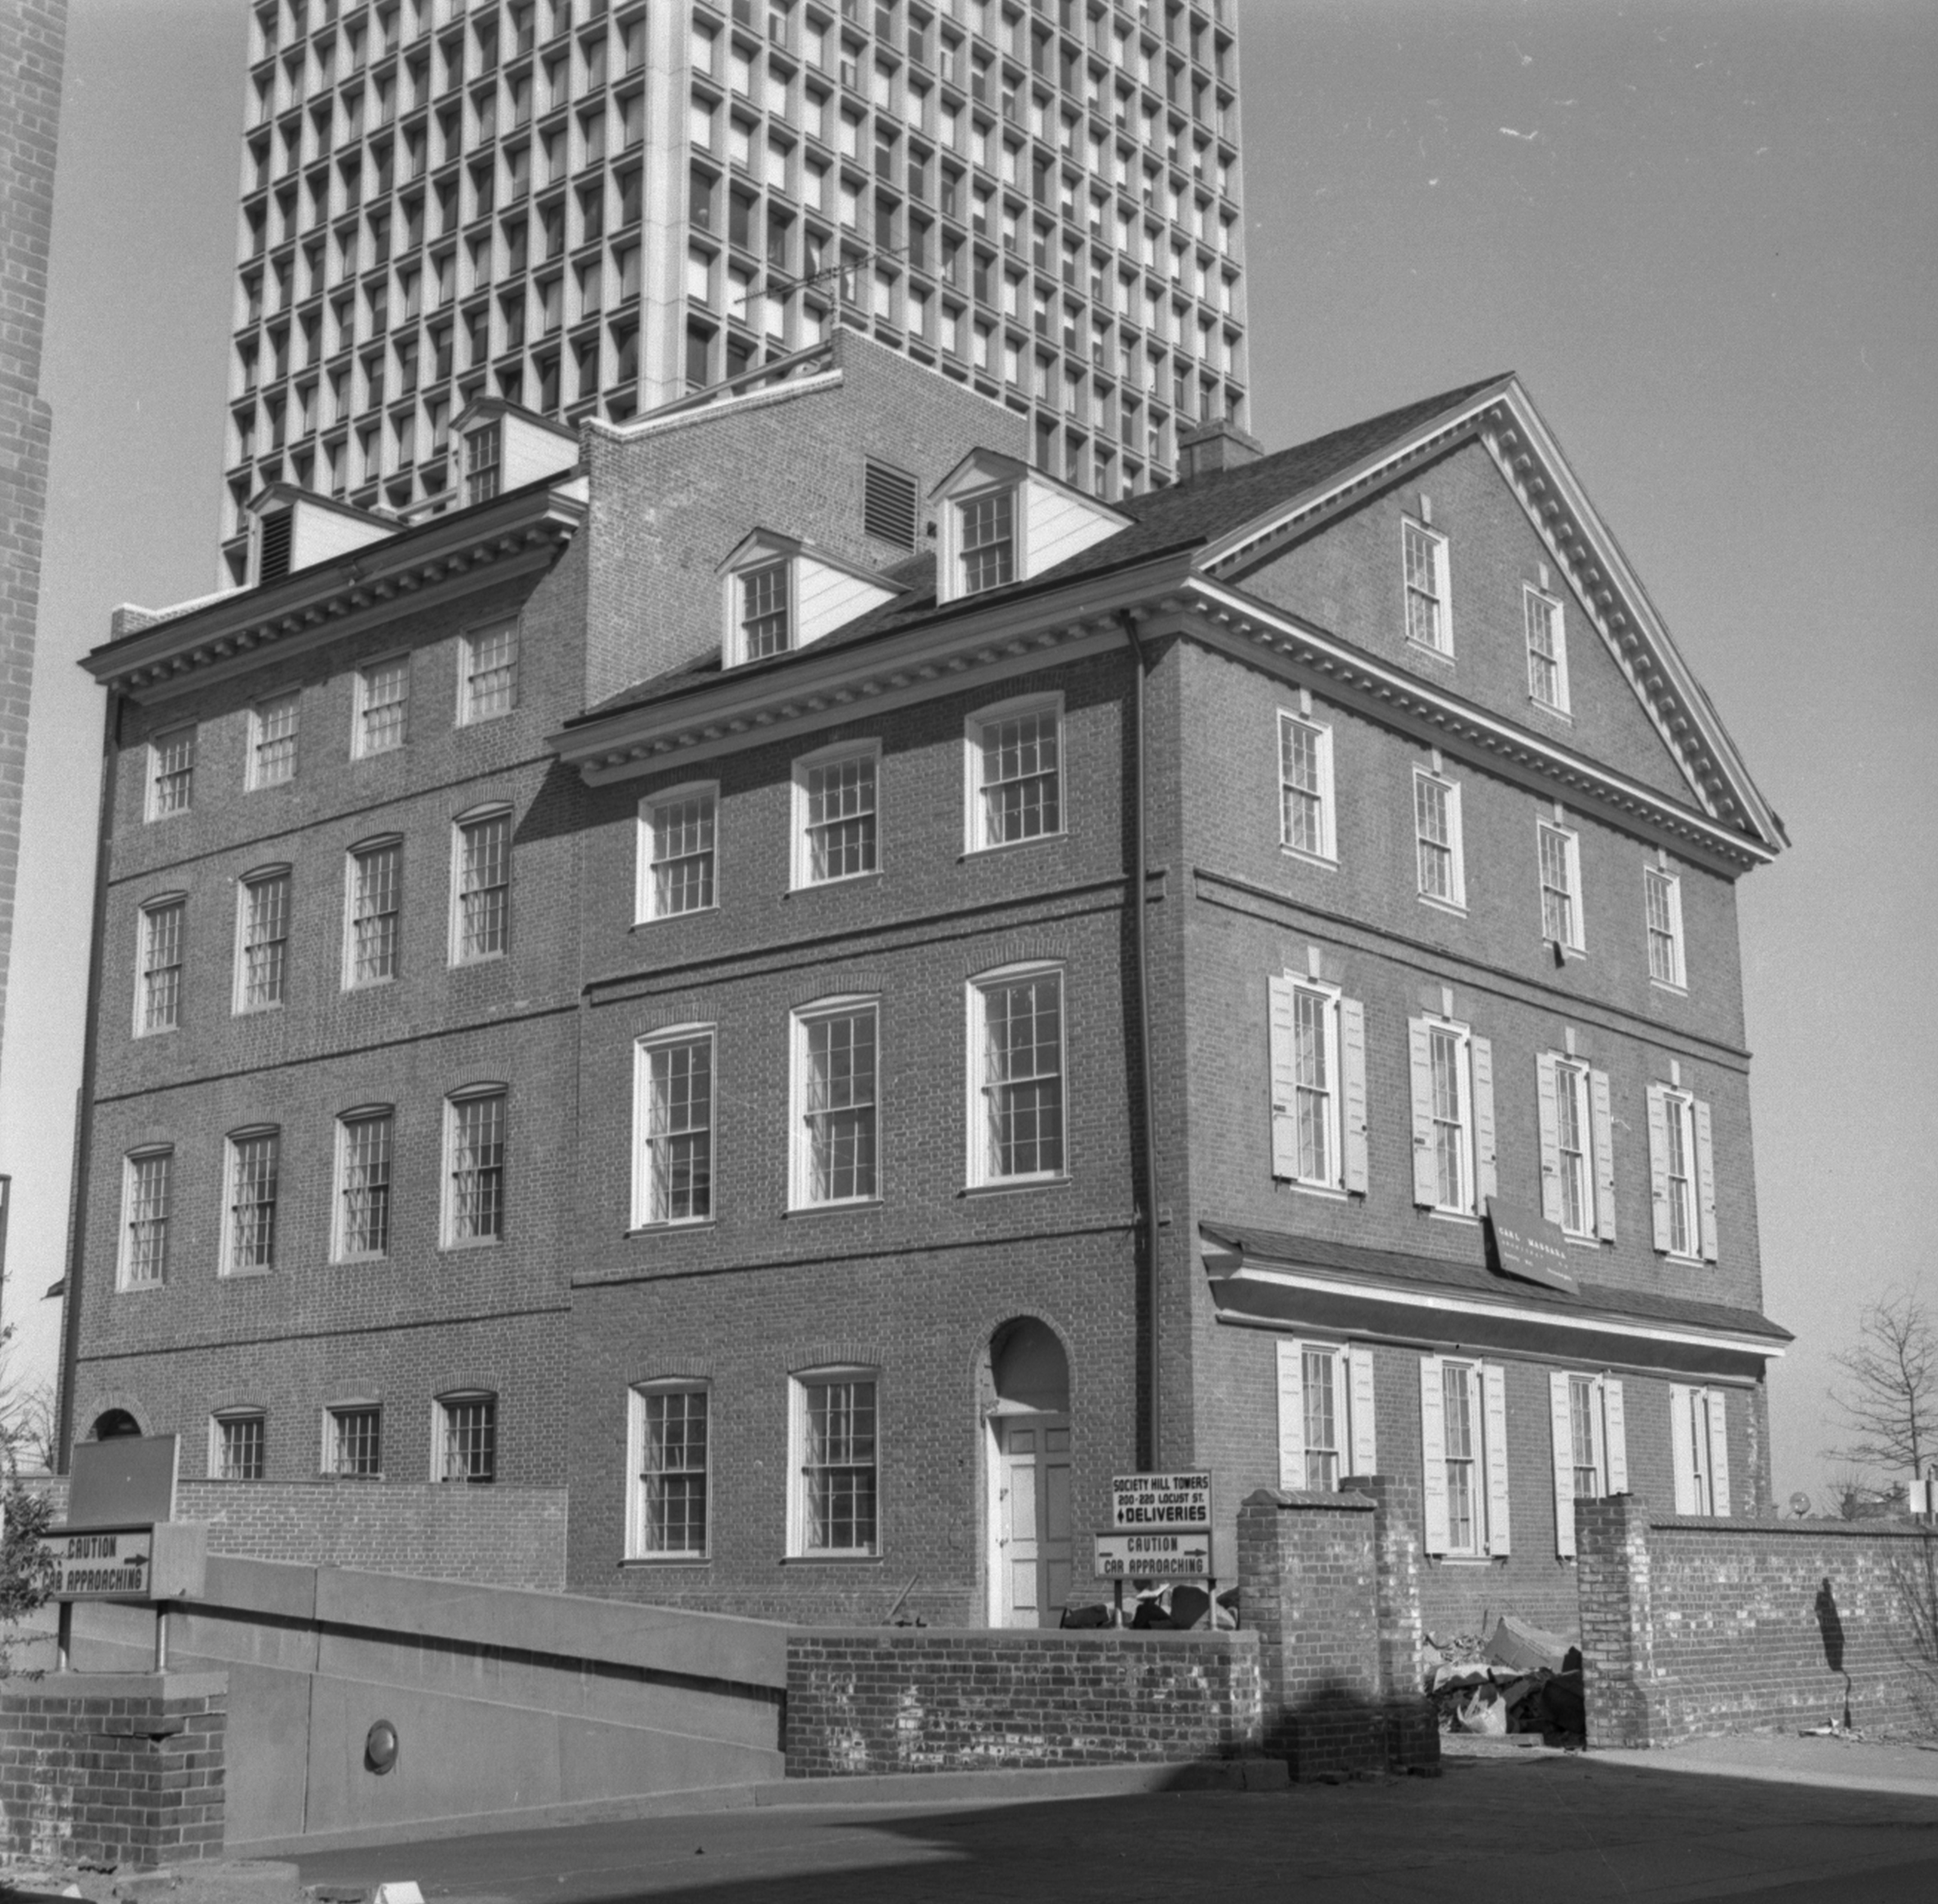 Society Hill Towers and Restoration, corner of Spruce and S 2nd Streets